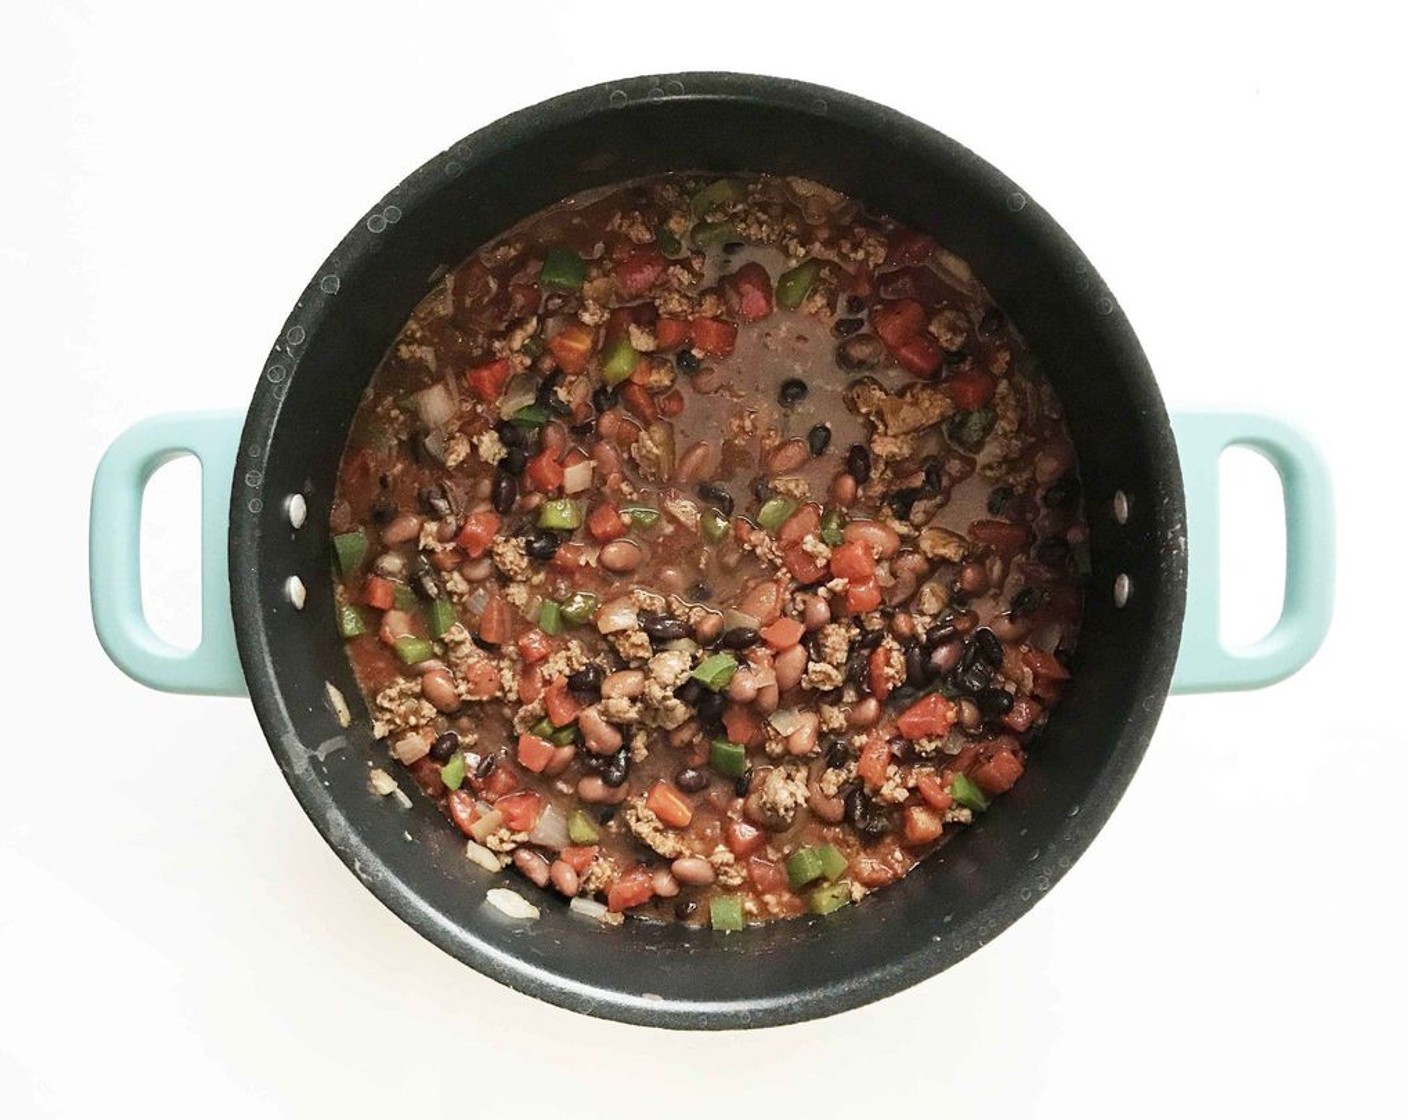 step 5 When the meat is browned and veggies are softening, add Diced Tomatoes (2 cans), Garlic (1 clove), Chili Powder (1 Tbsp), Dried Oregano (1 tsp), Smoked Paprika (1 tsp), Ground Cumin (1 tsp), Salt (to taste), Ground Black Pepper (to taste) and the beans in the stockpot together; cover and simmer for another 30-60 minutes, stirring on occasion. Keep cooking until the beans are soft.